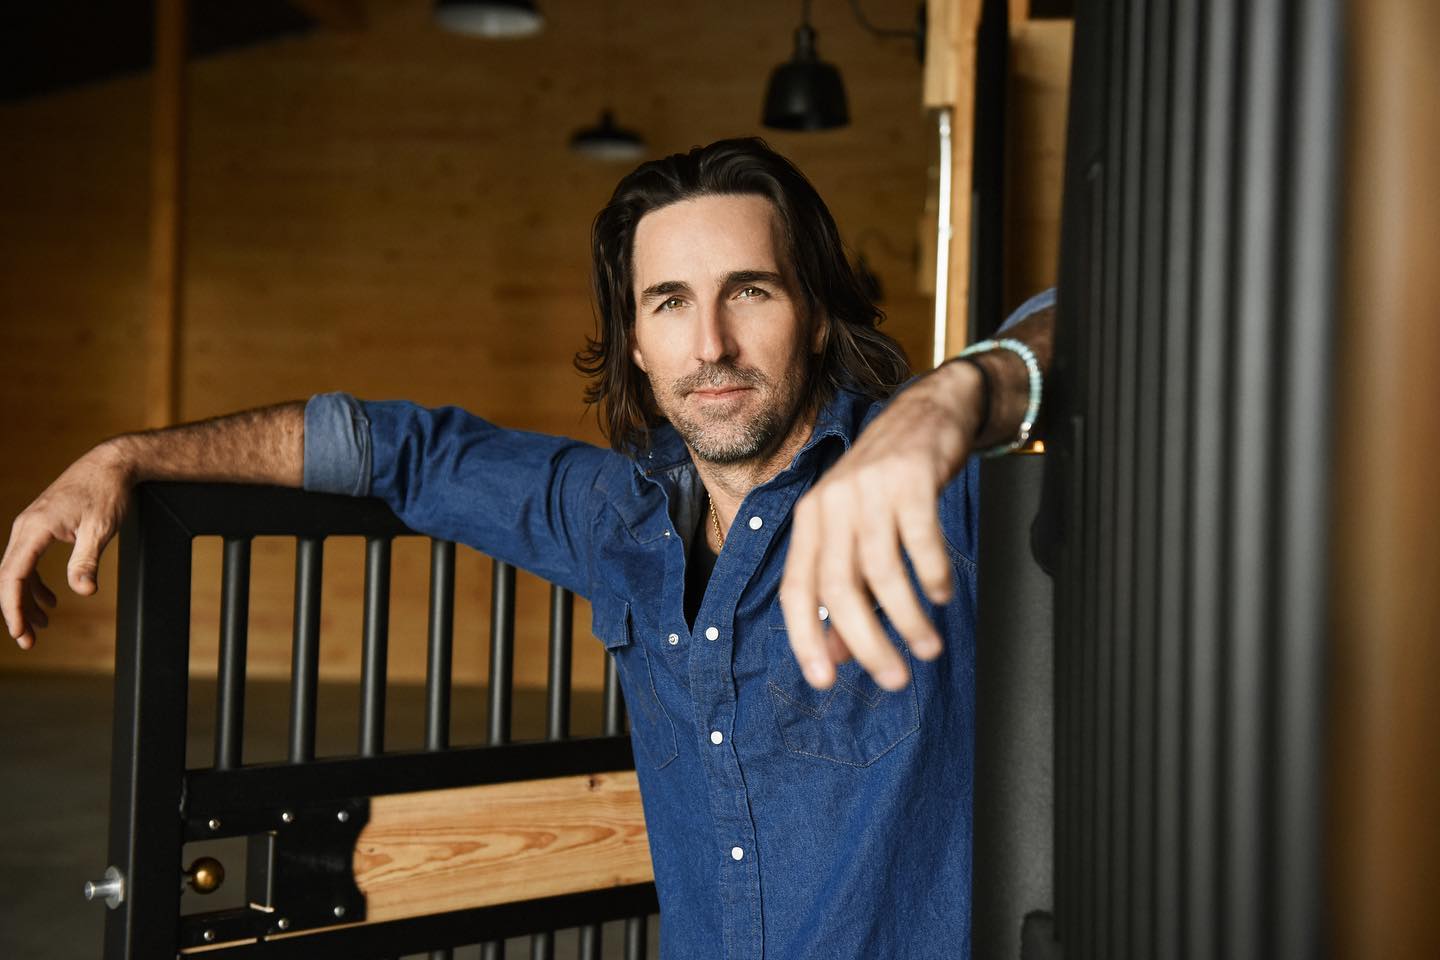 New Music Friday: Jake Owen Releases Four New Tracks Ahead of His Highly-Anticipated Seventh Studio Album, “Loose Cannon”